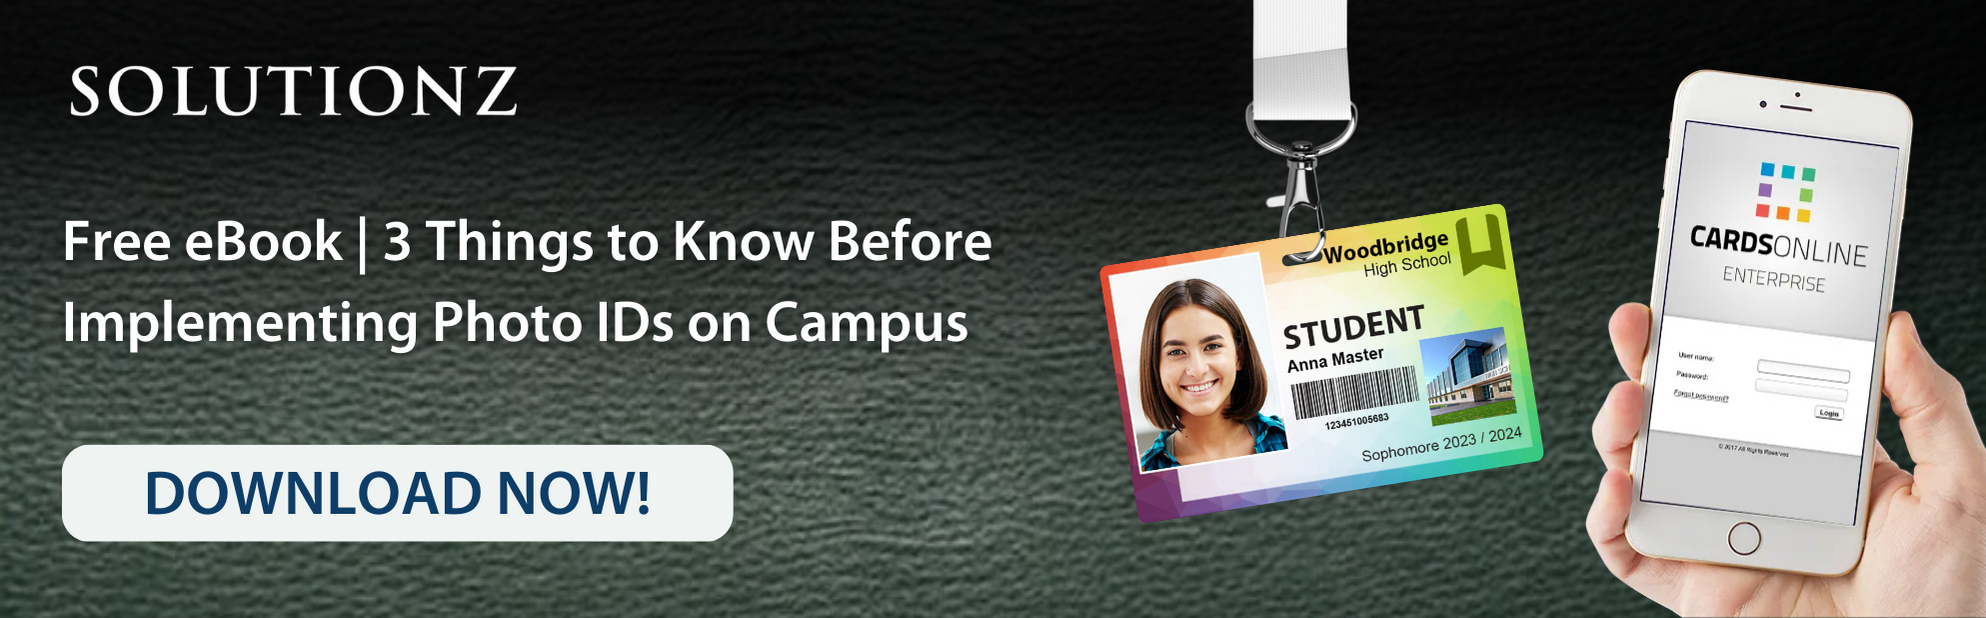 Free eBook | 3 Things to Know Before Implementing Photo IDs on Campus